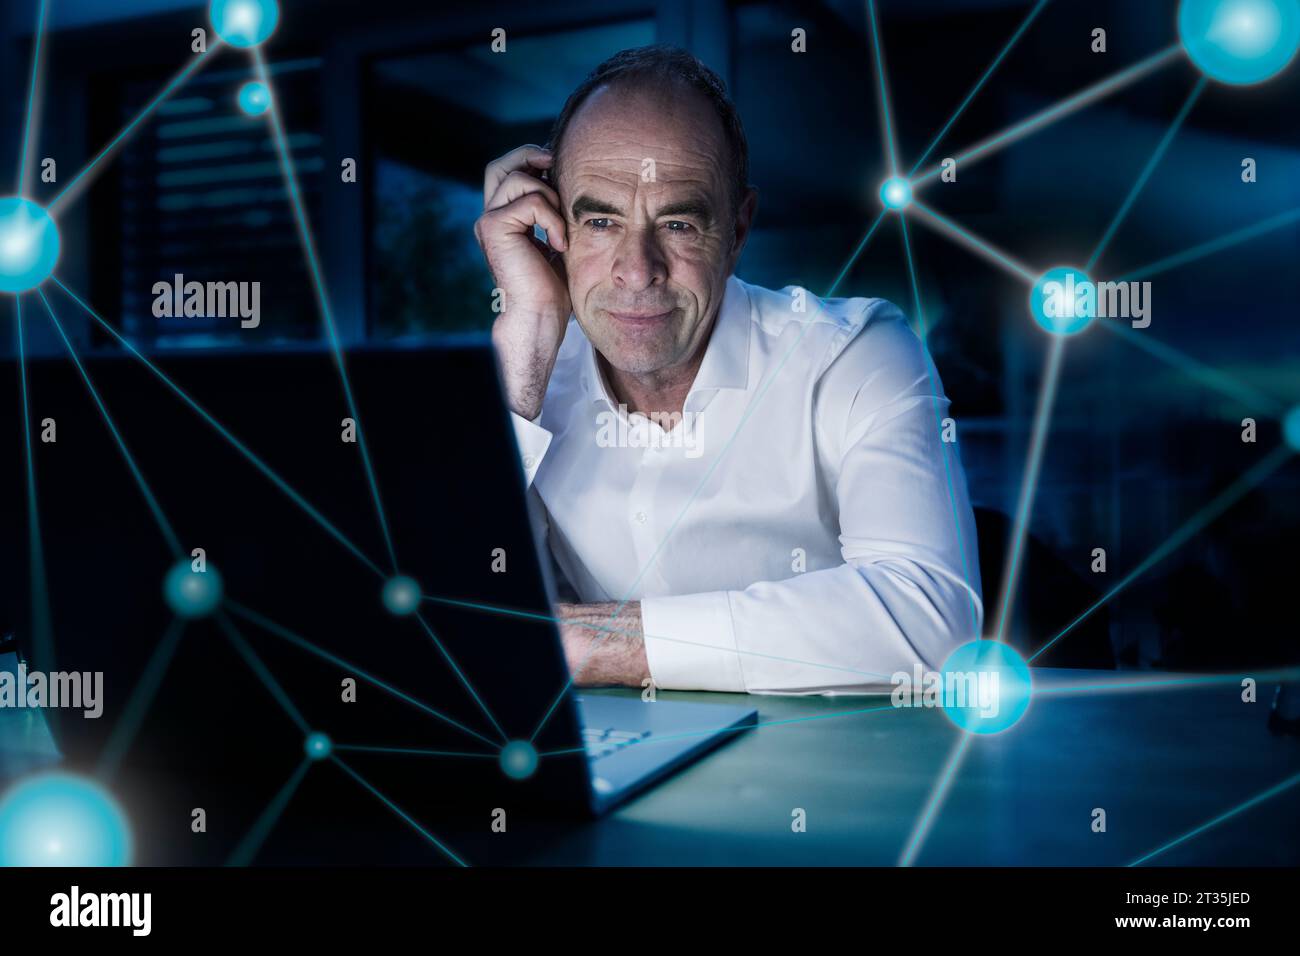 Digital composite image of connecting dots and thoughtful businessman with laptop in office Stock Photo